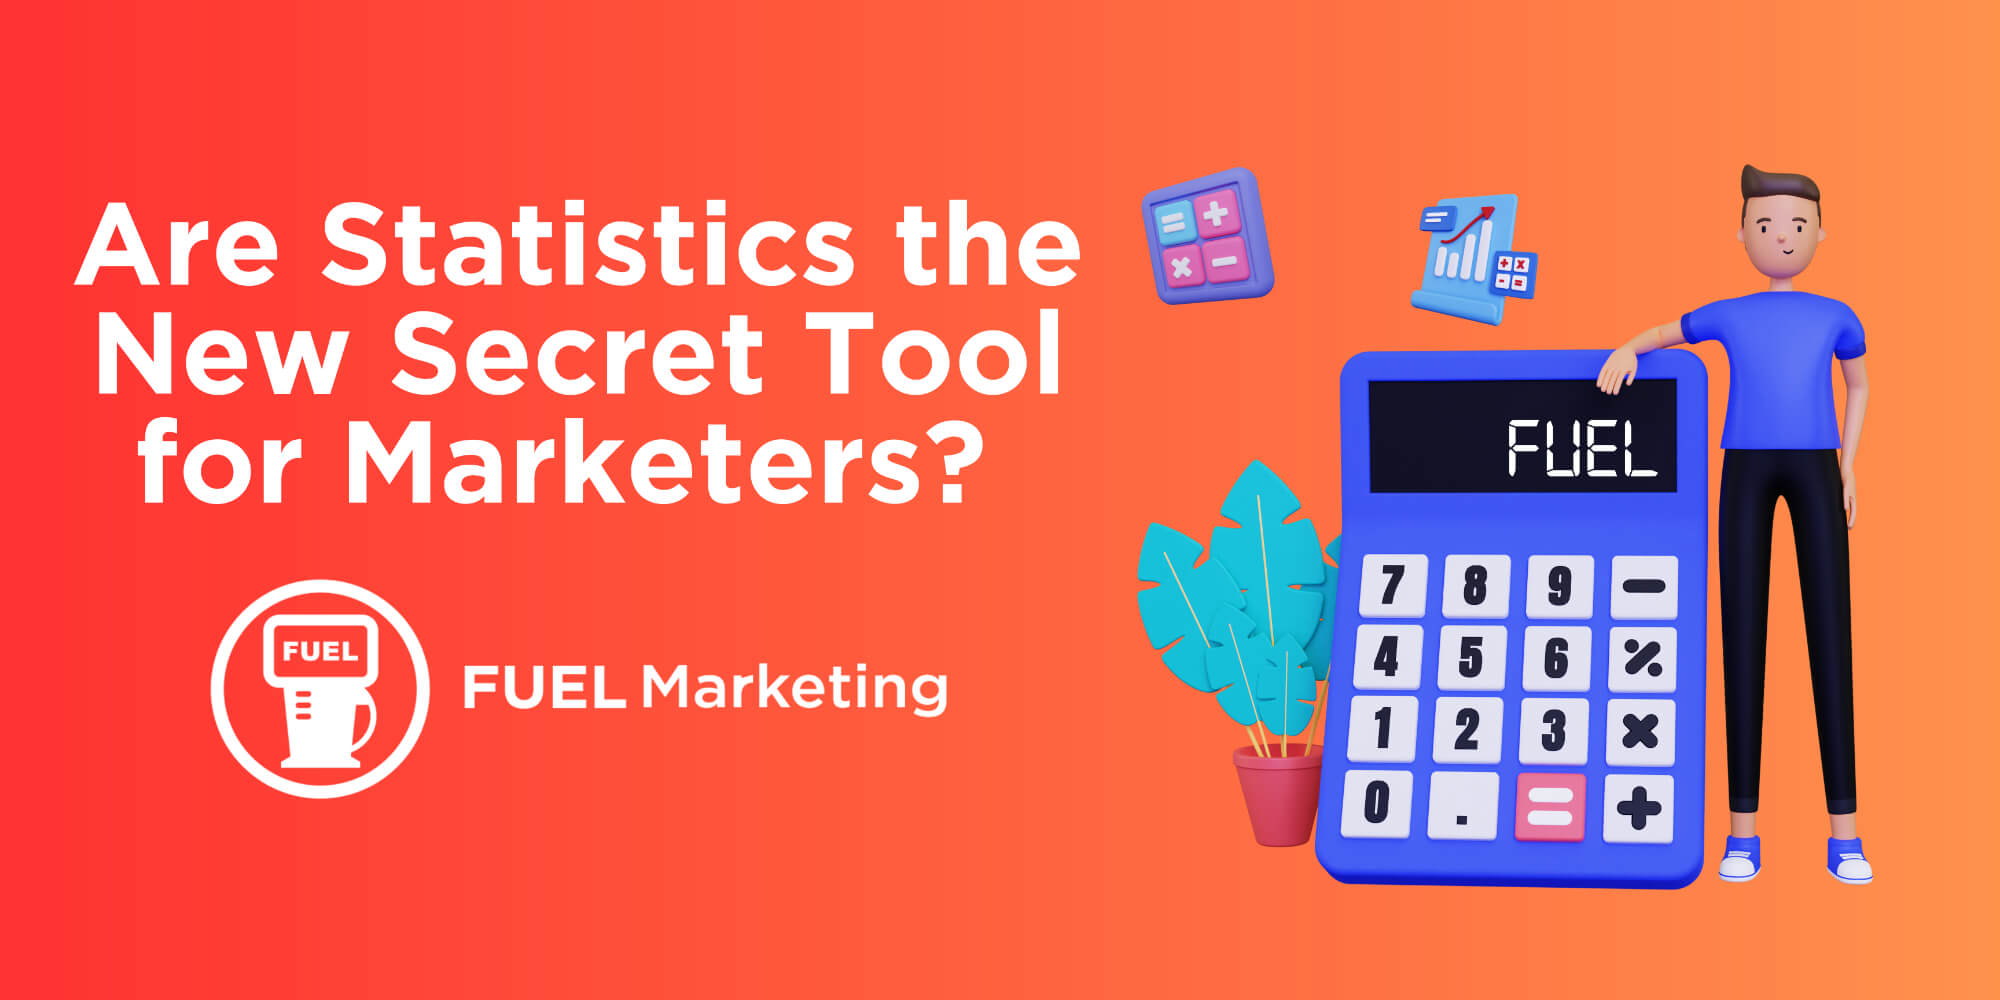 Are statistics the new secret tool for marketers?